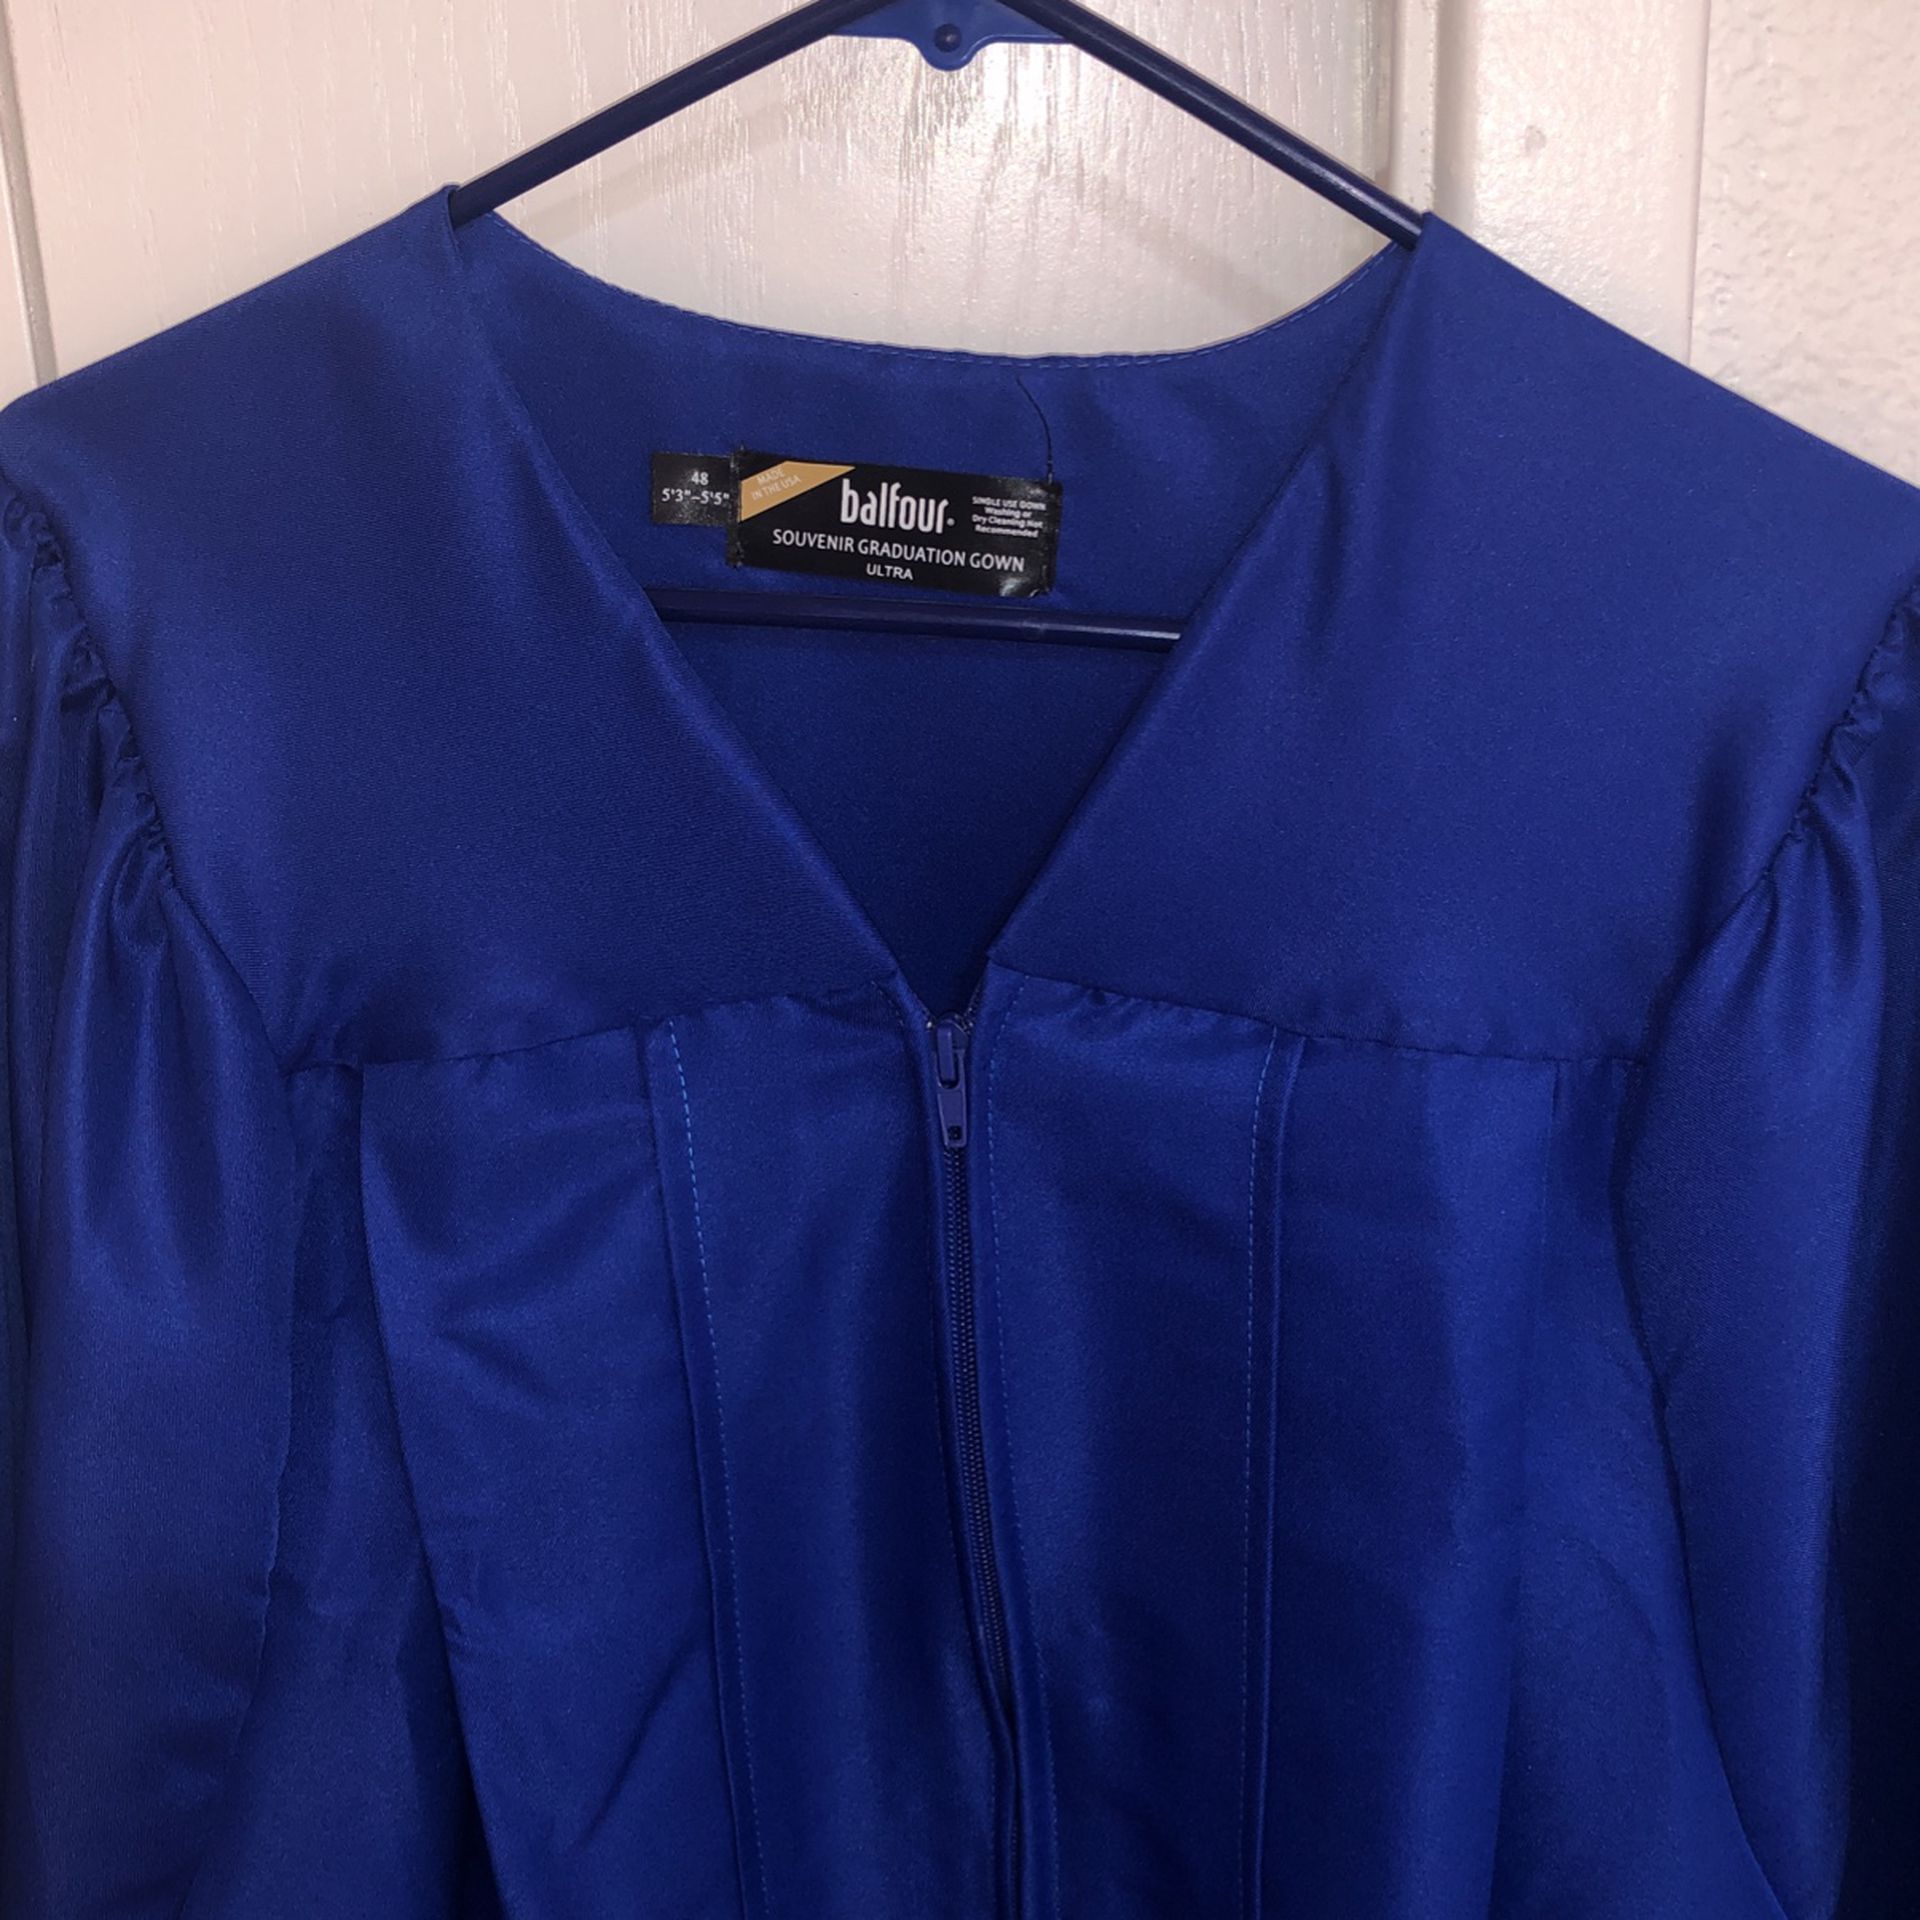 Cap and Gown - Royal Blue